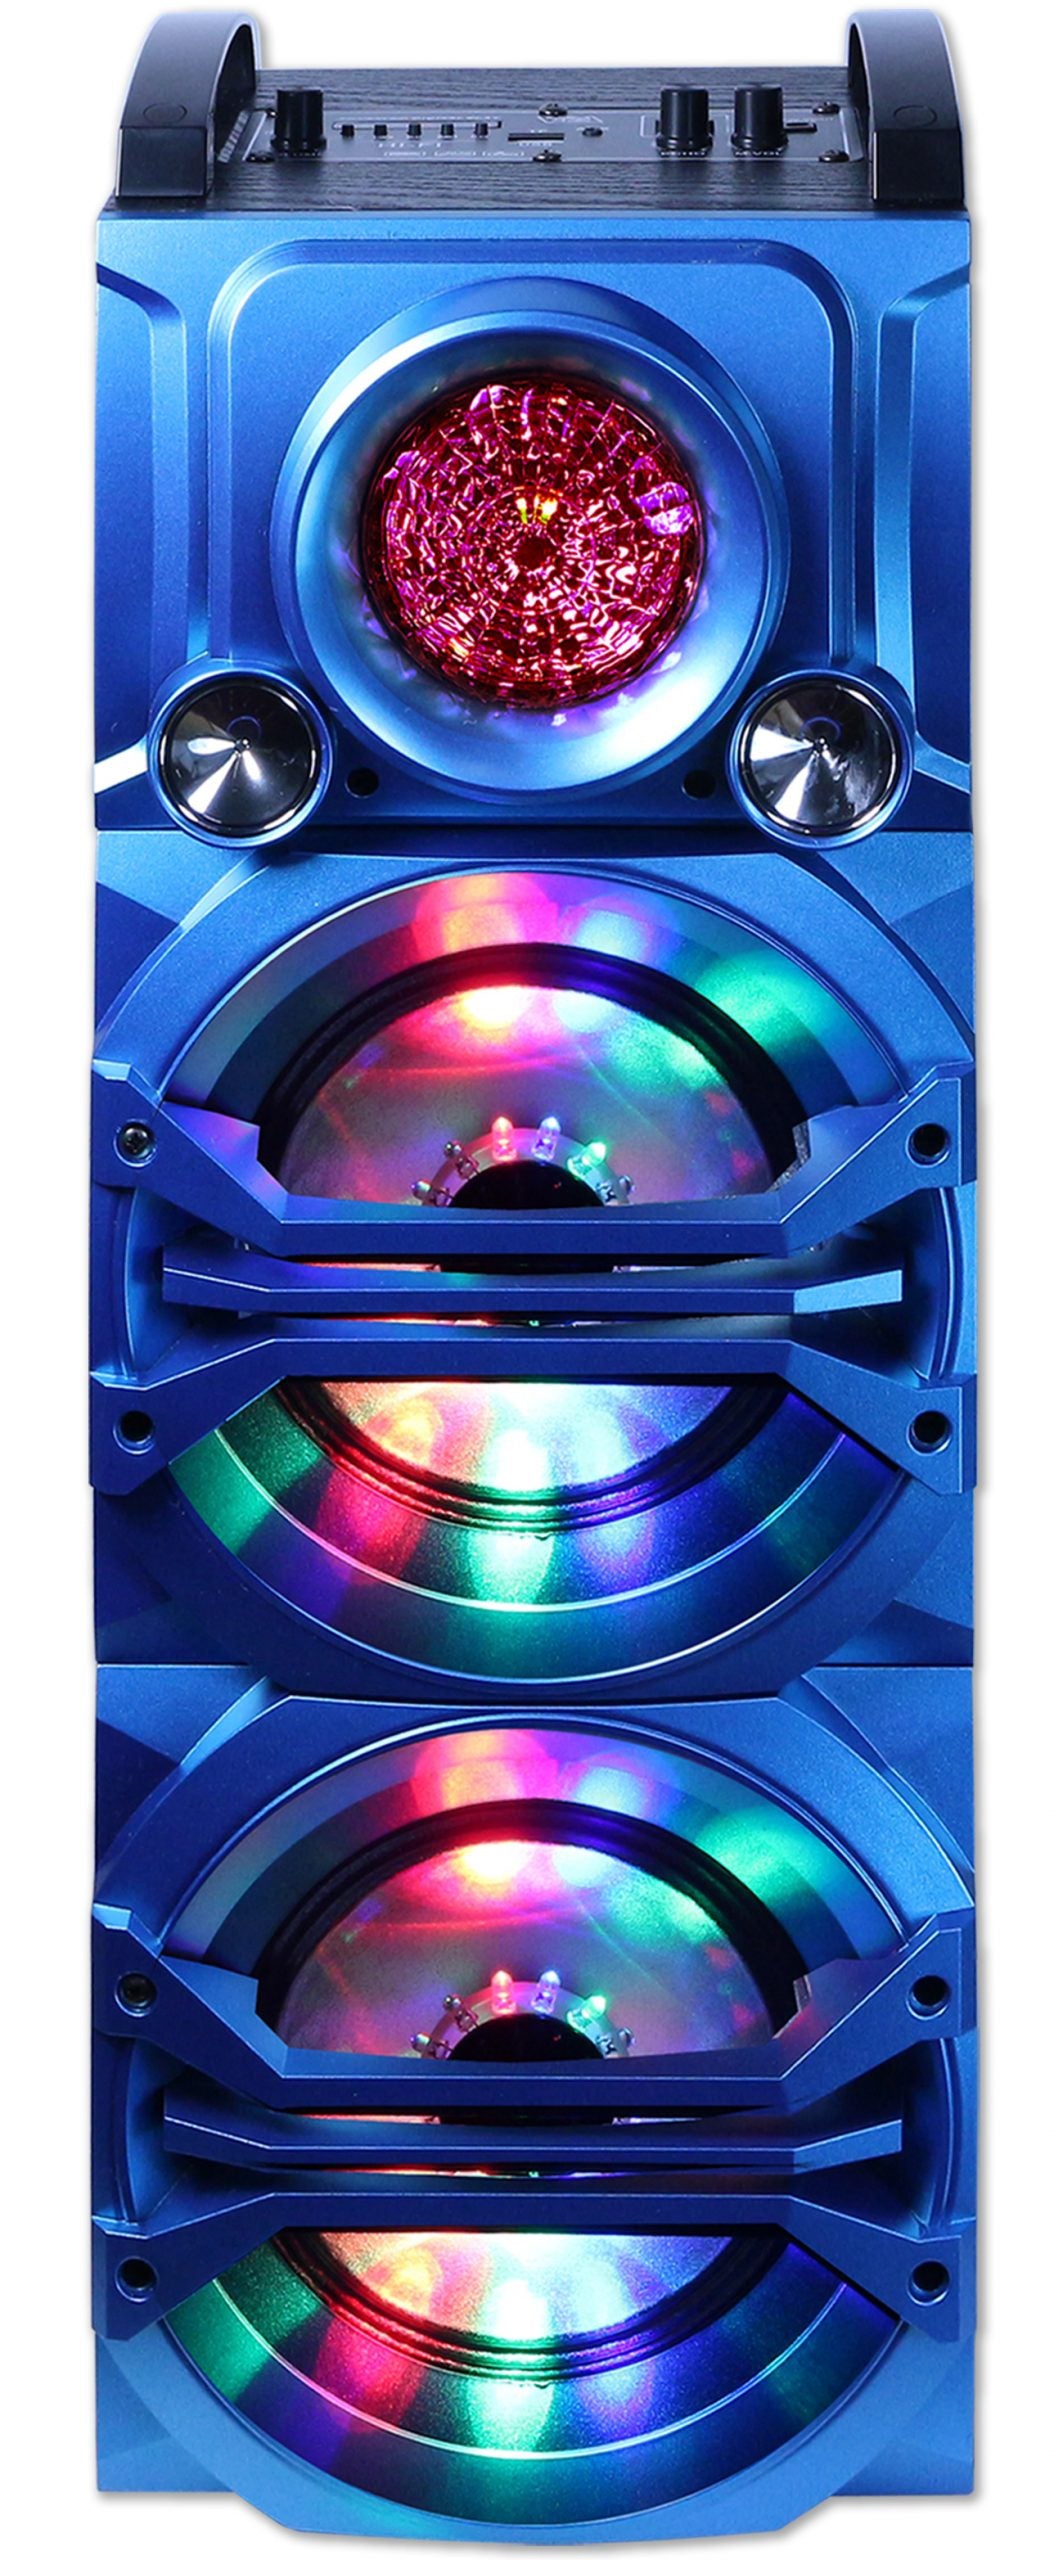 Fully Amplified Portable 1300 Watts Peak Power Double 6.5” Speaker with led light